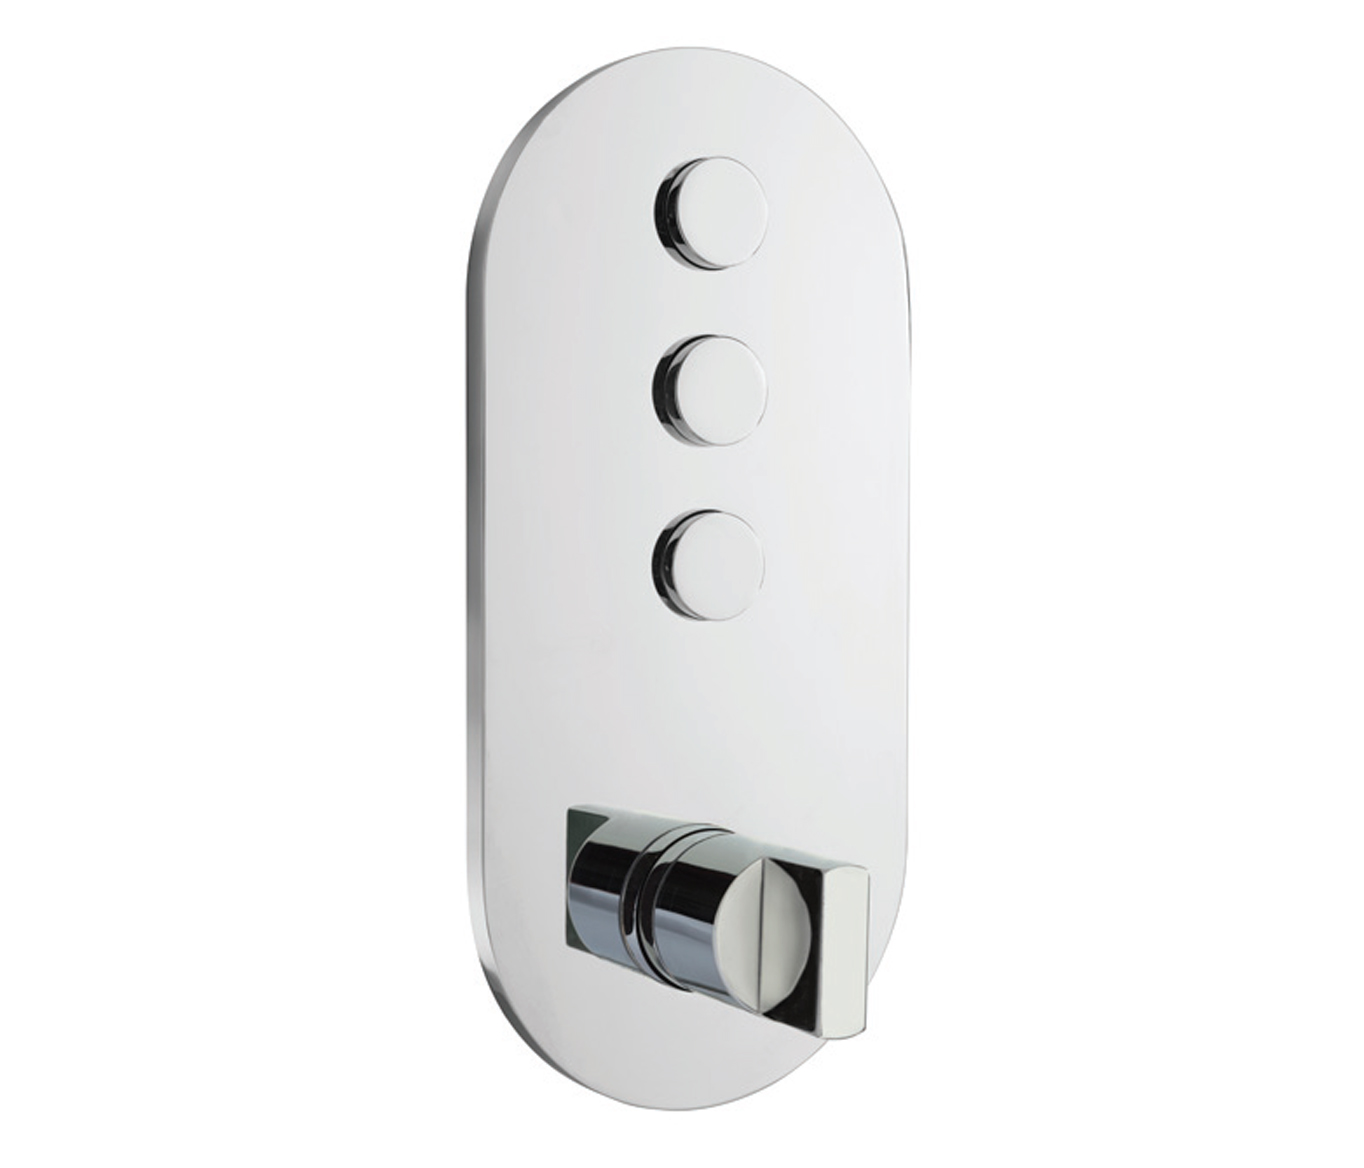 Leo 3 Outlet Touch Thermostat